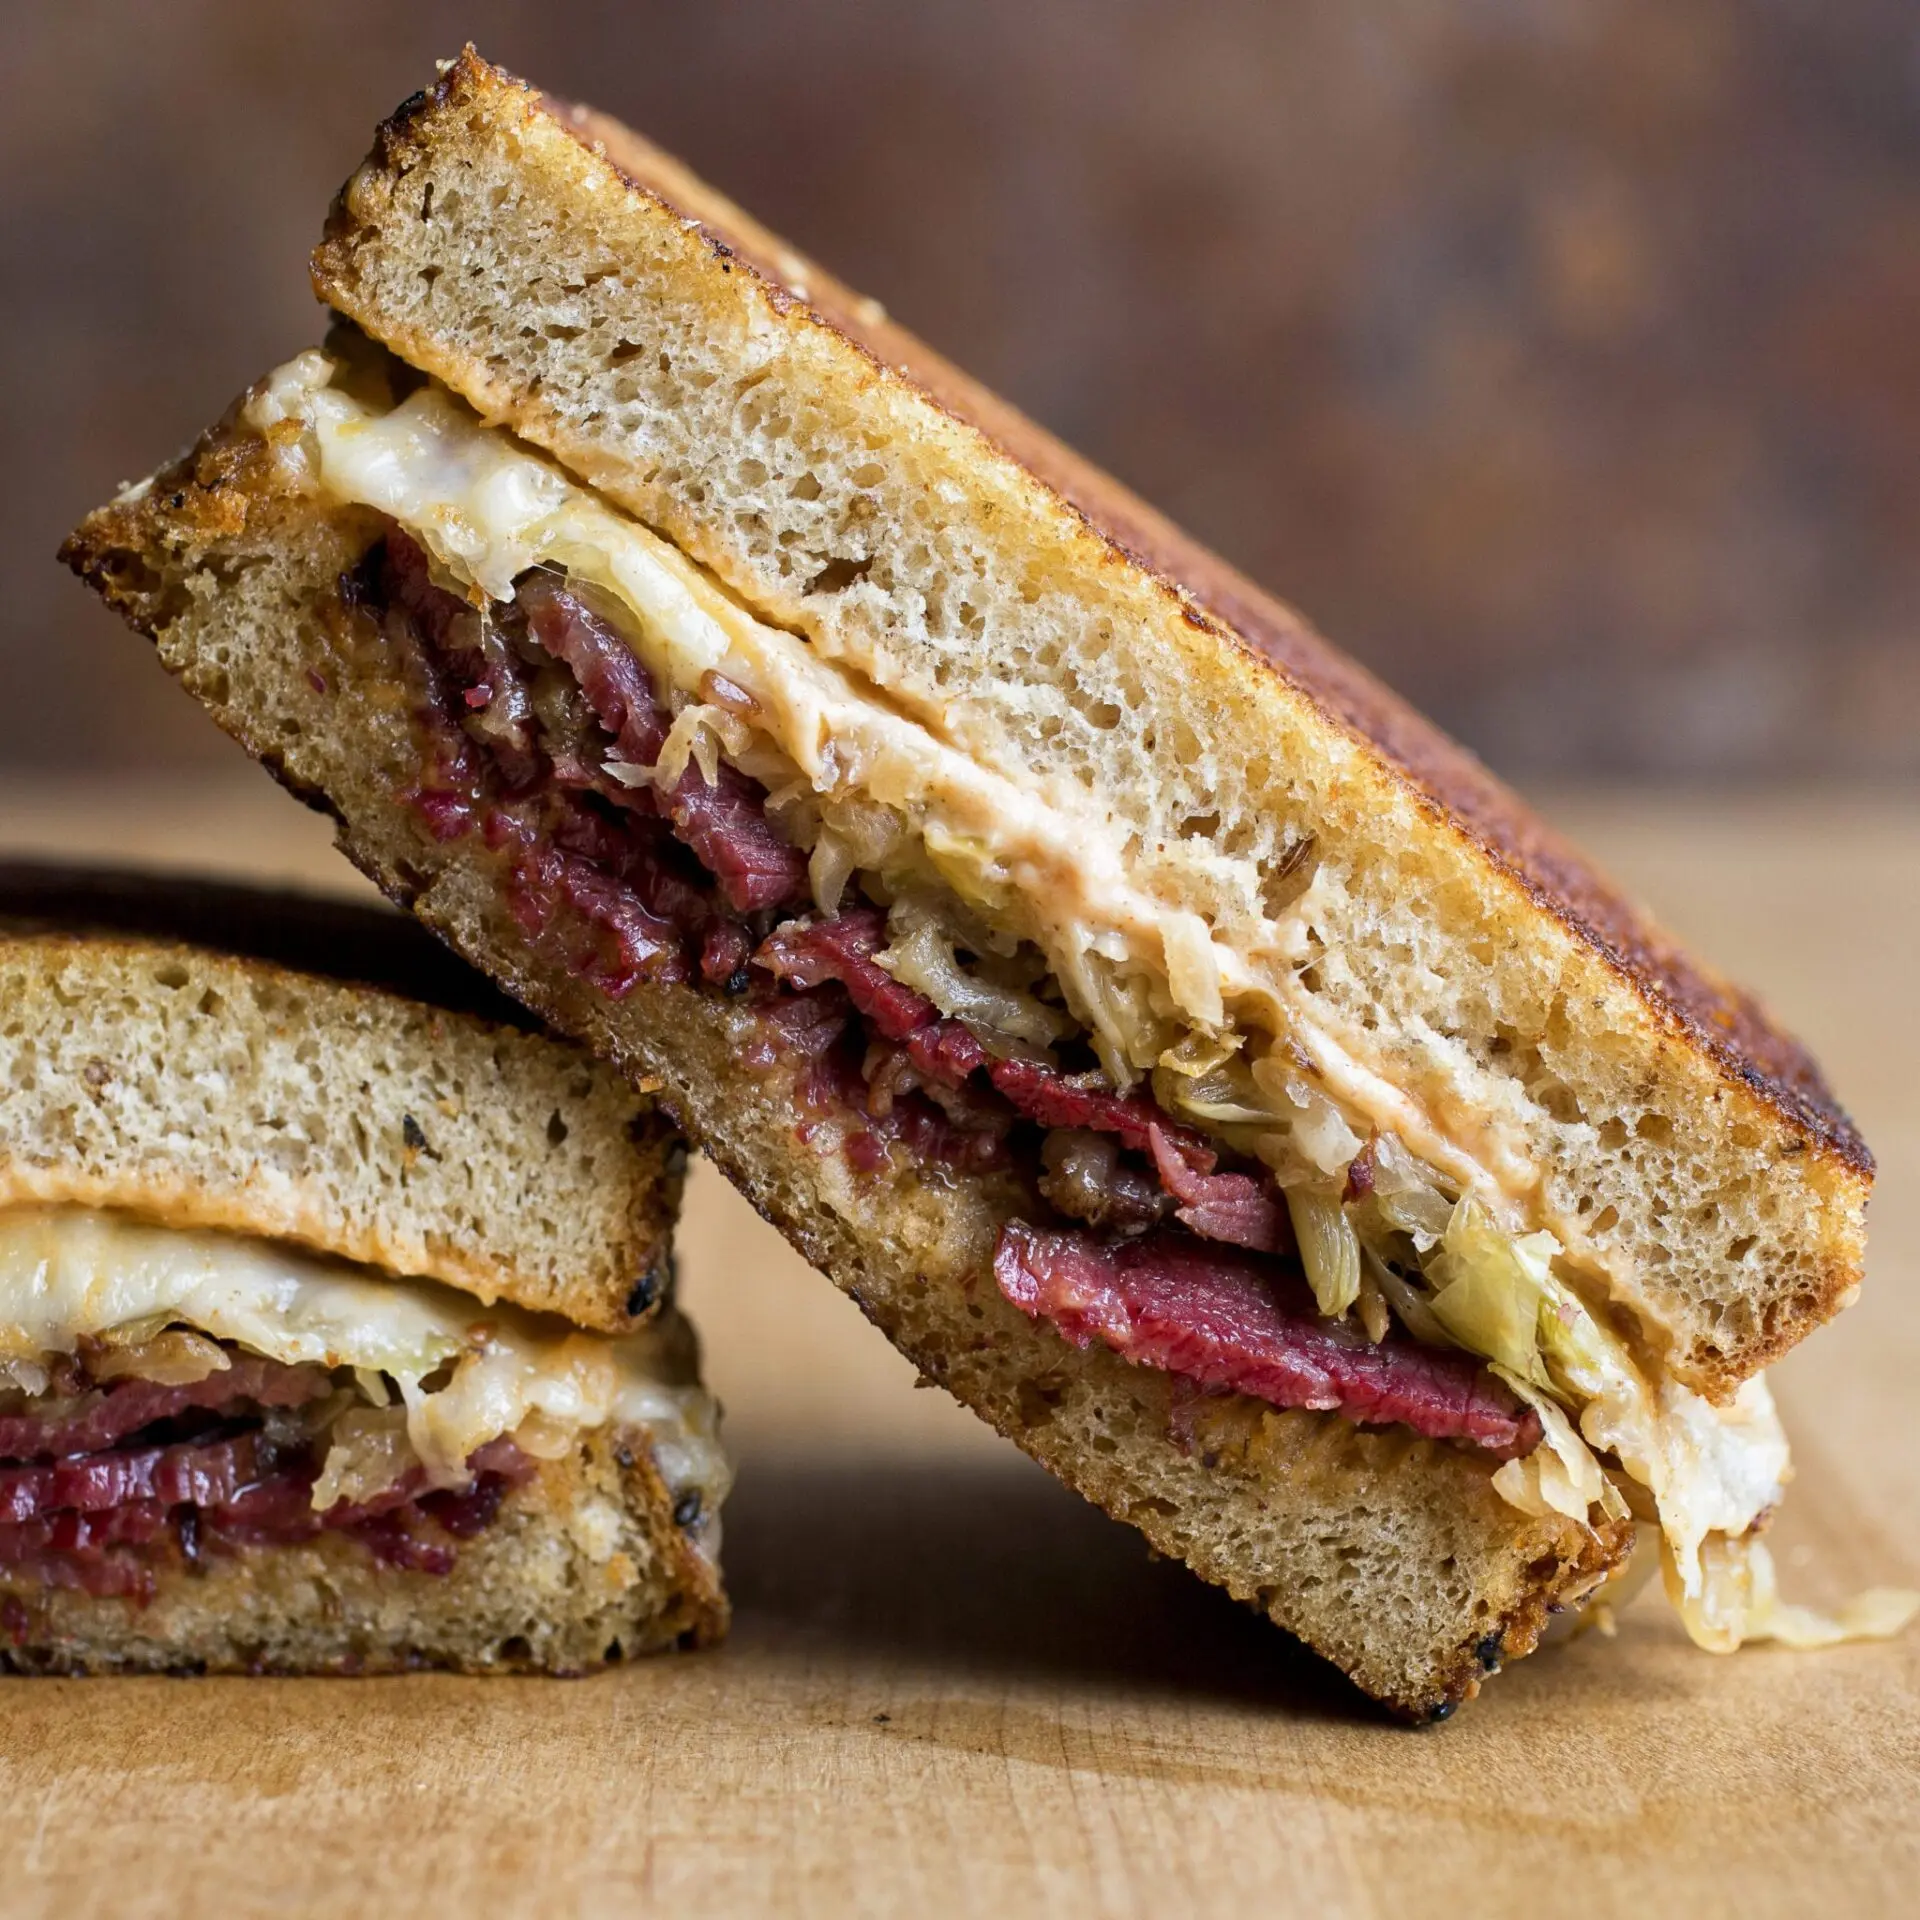 smoked pastrami sandwich - What goes well with pastrami in a sandwich